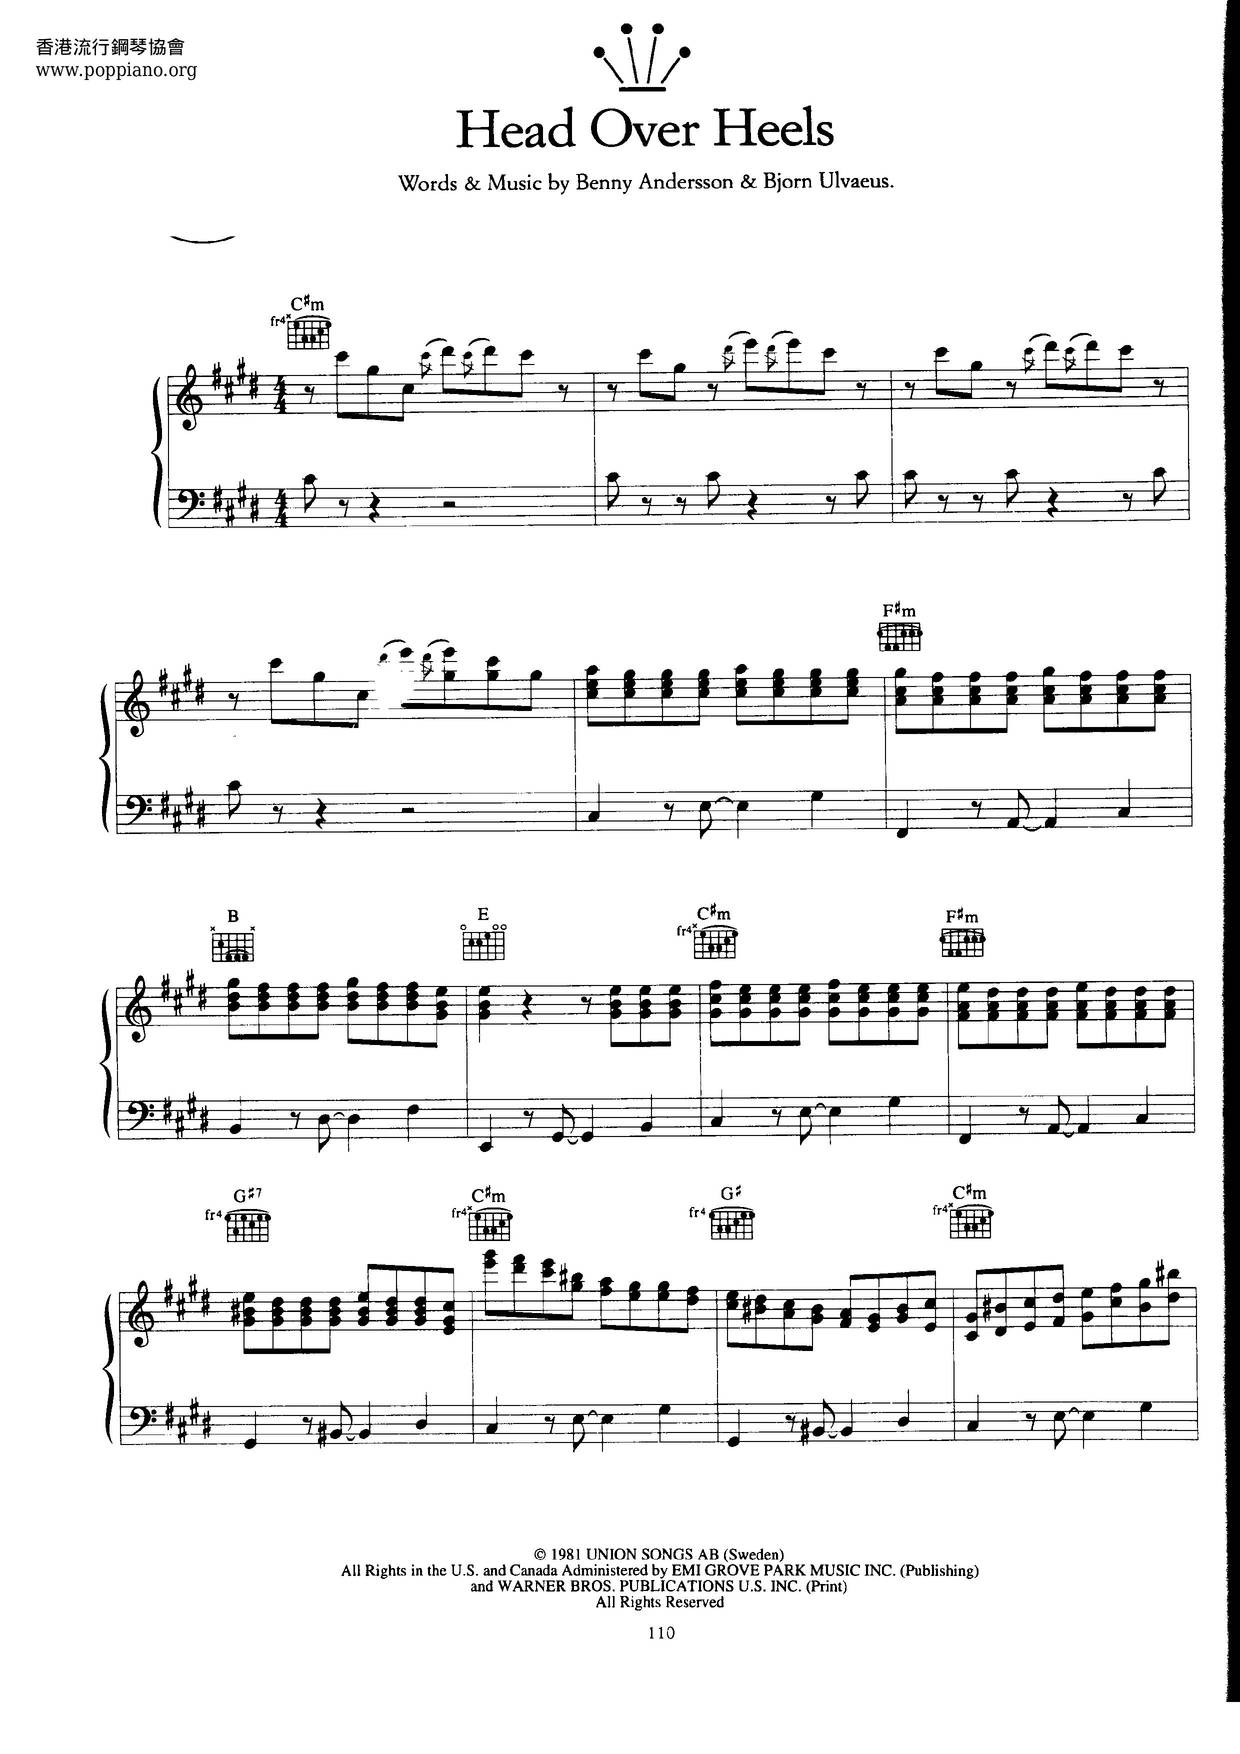 Tears For Fears - Head Over Heels - Sheet Music For Trumpet